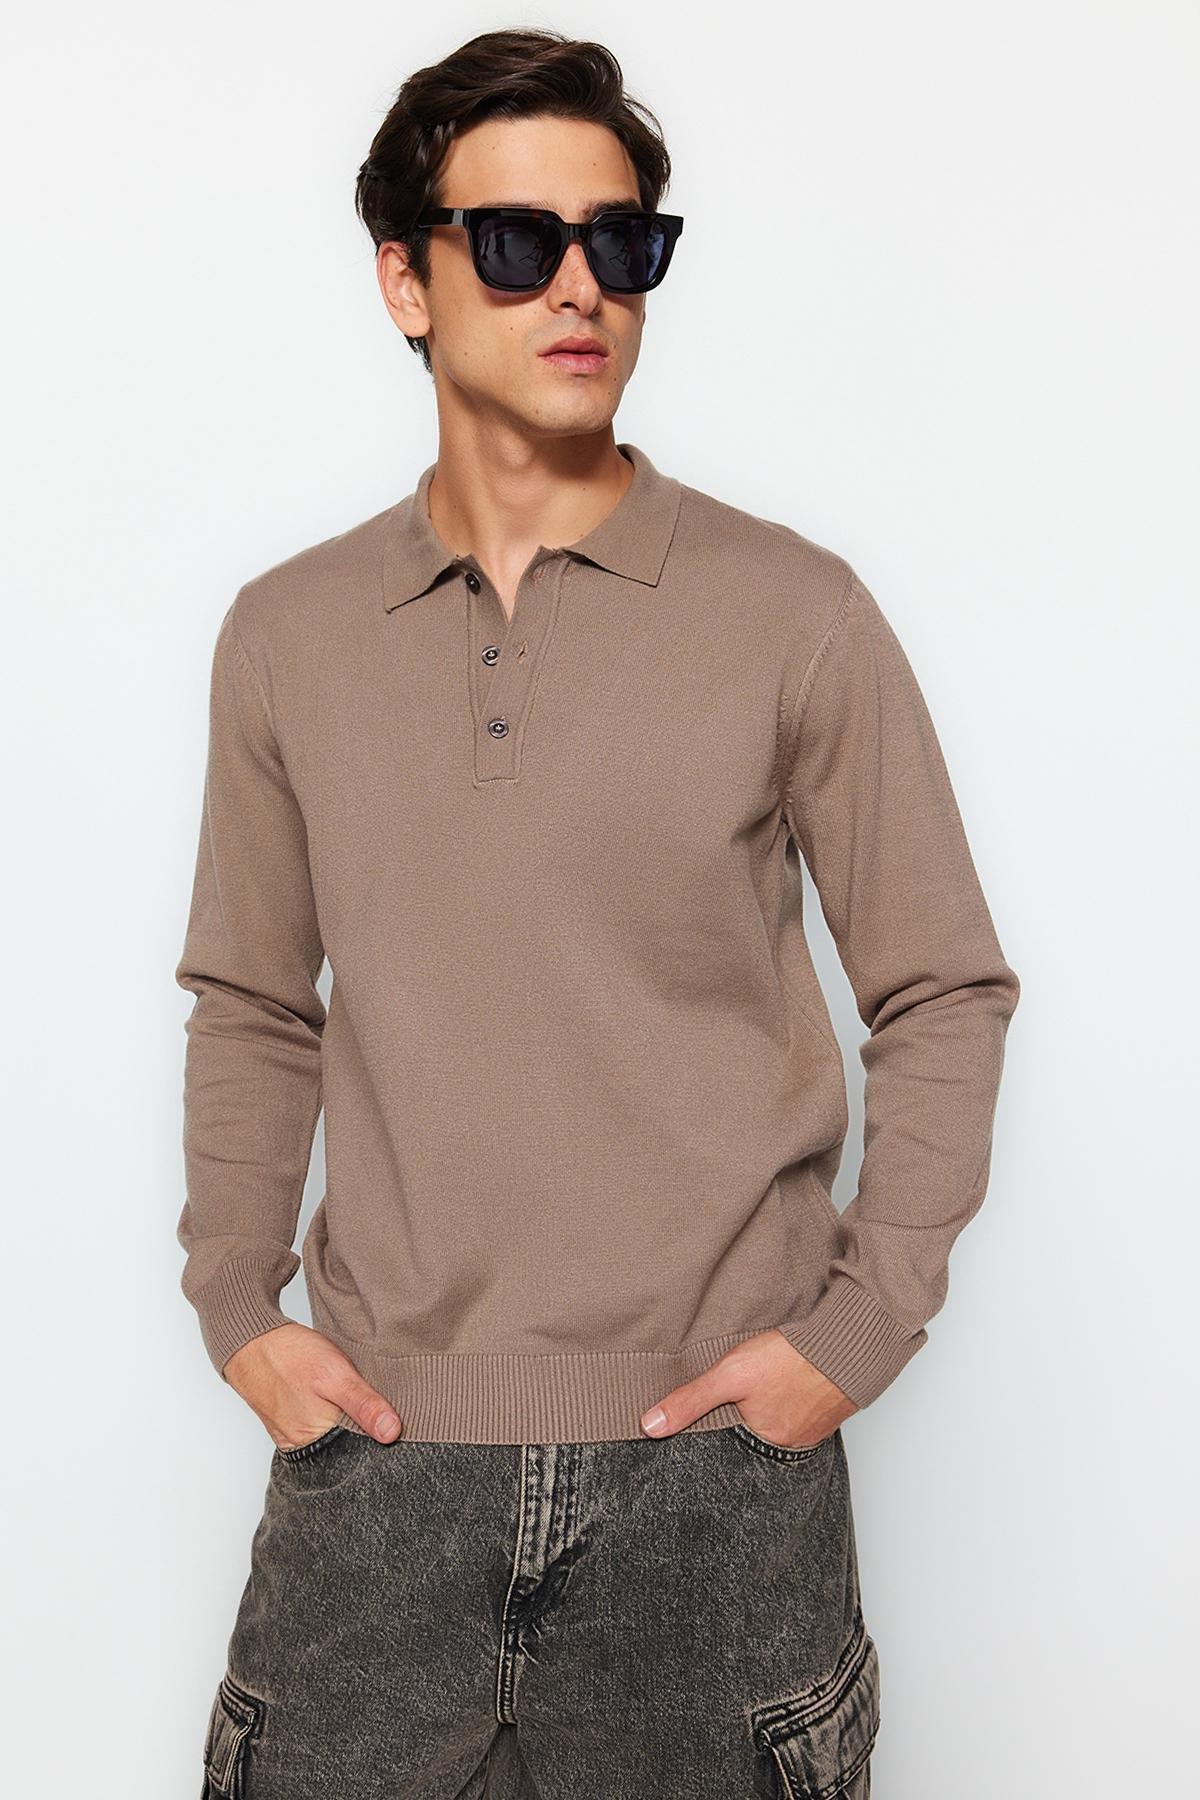 Trendyol - Brown Limited Edition Basic Knitwear Sweater.